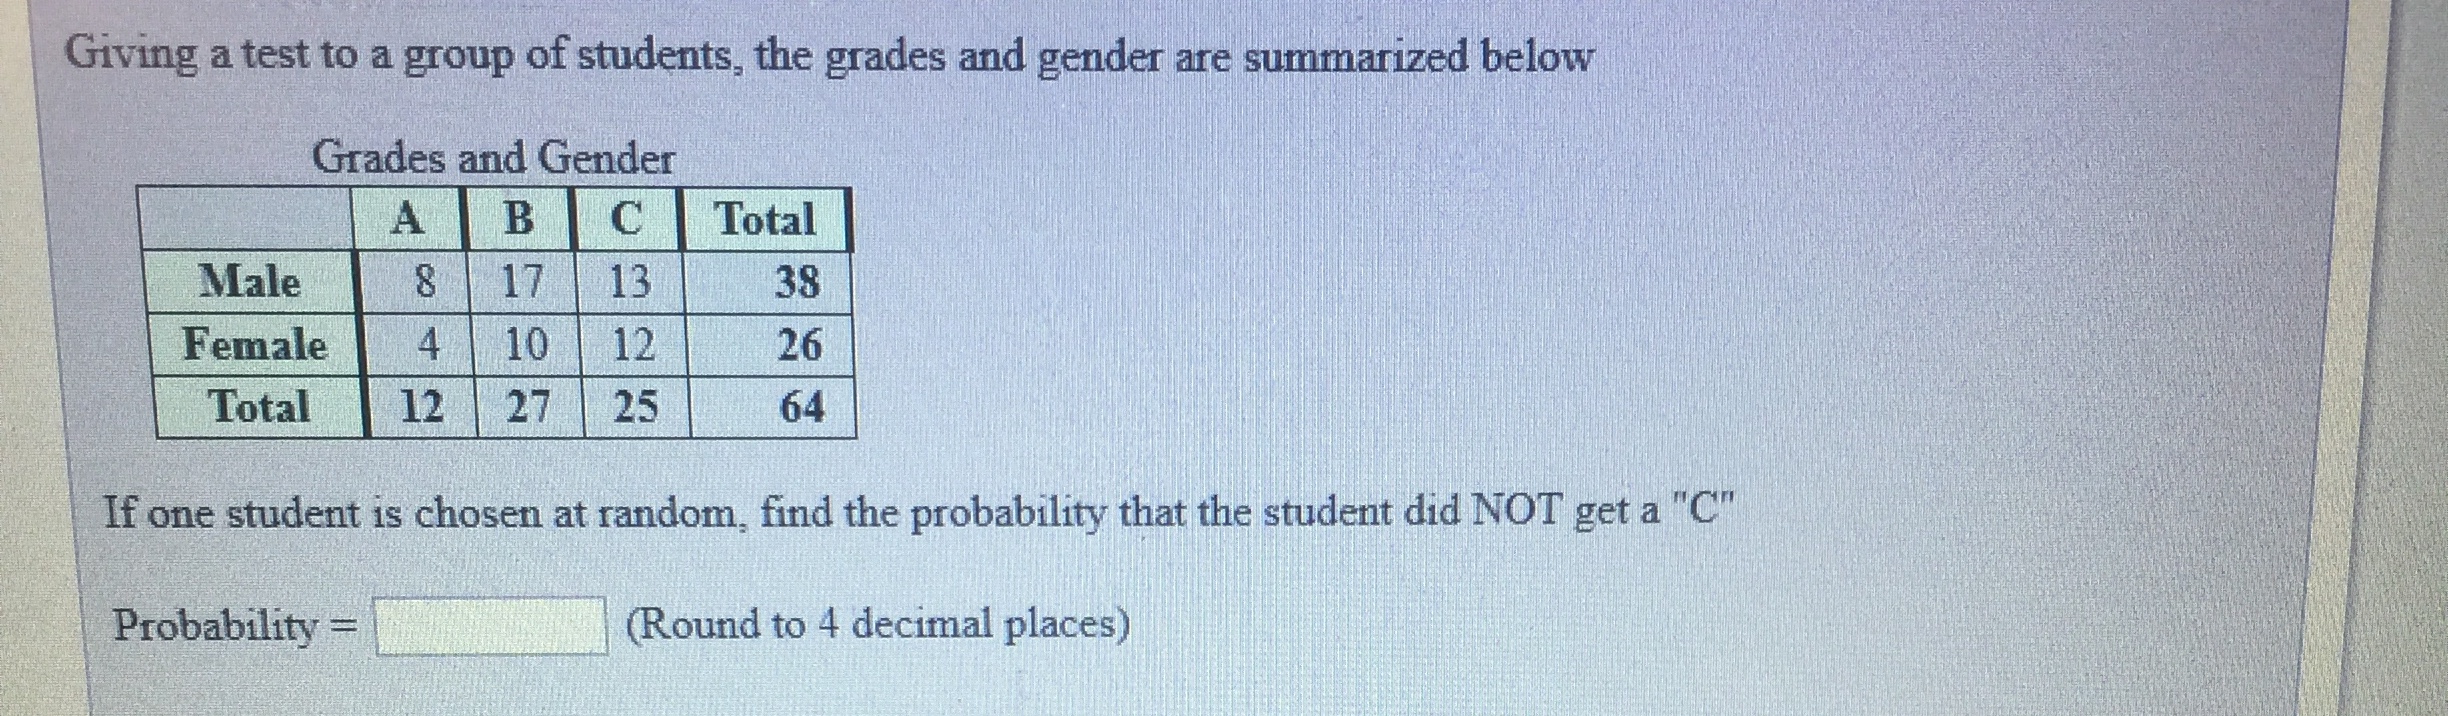 Giving a test to a group of students, the grades and gender are summarized below
Grades and Gender
Male 8 17 13
Female4 26
Total 12 27 25 64
38
10 12
If one student is chosen at random, find the probability that the student did NOT get a "C"
Probability-
(Round to 4 decimal places)
